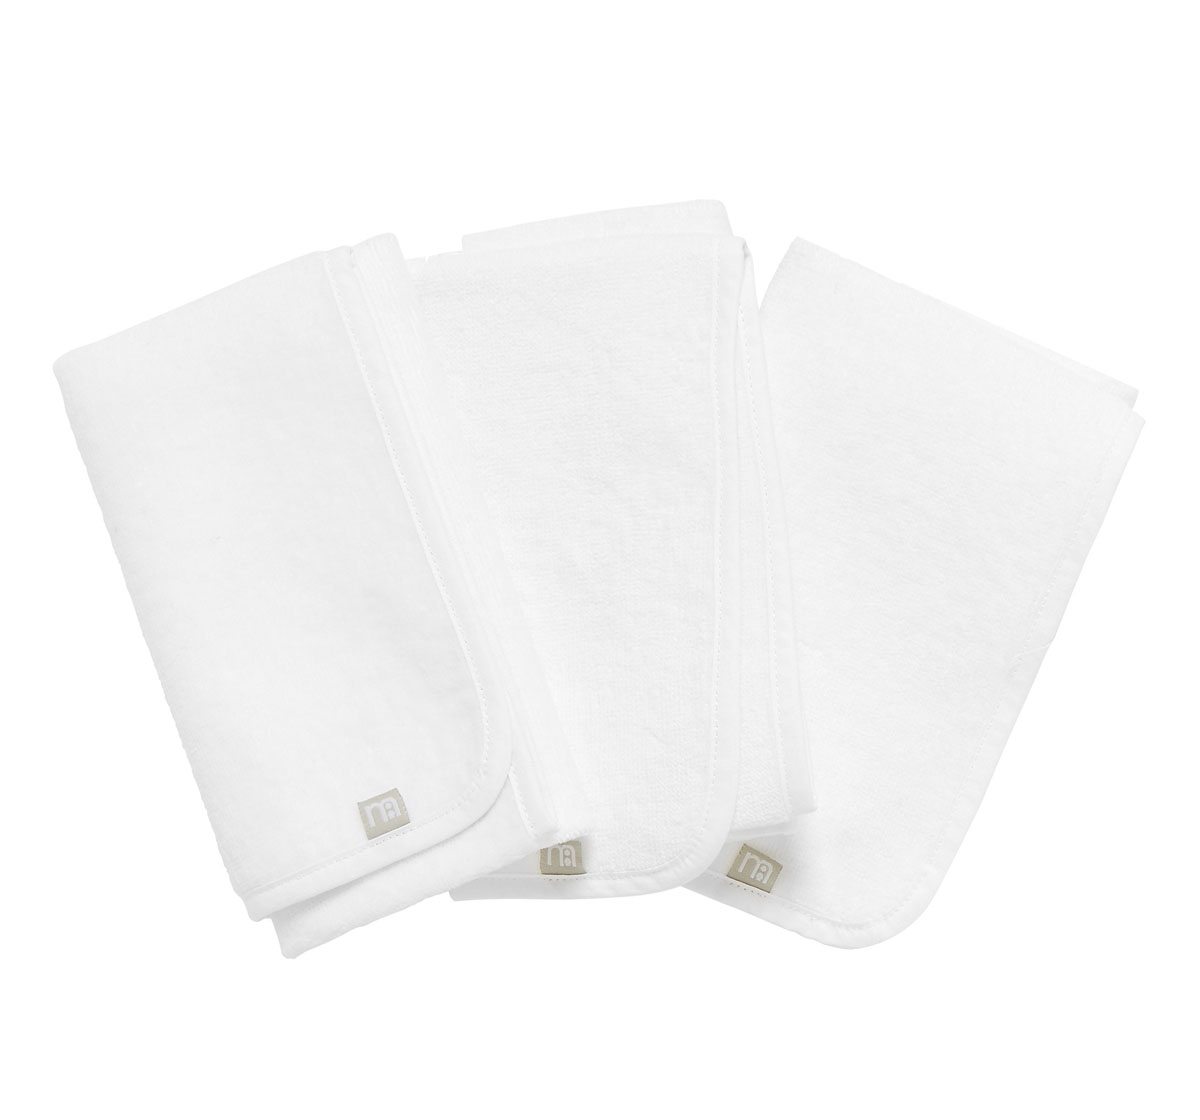 Mothercare | Mothercare Changing Mat Liners Pack of 3 White